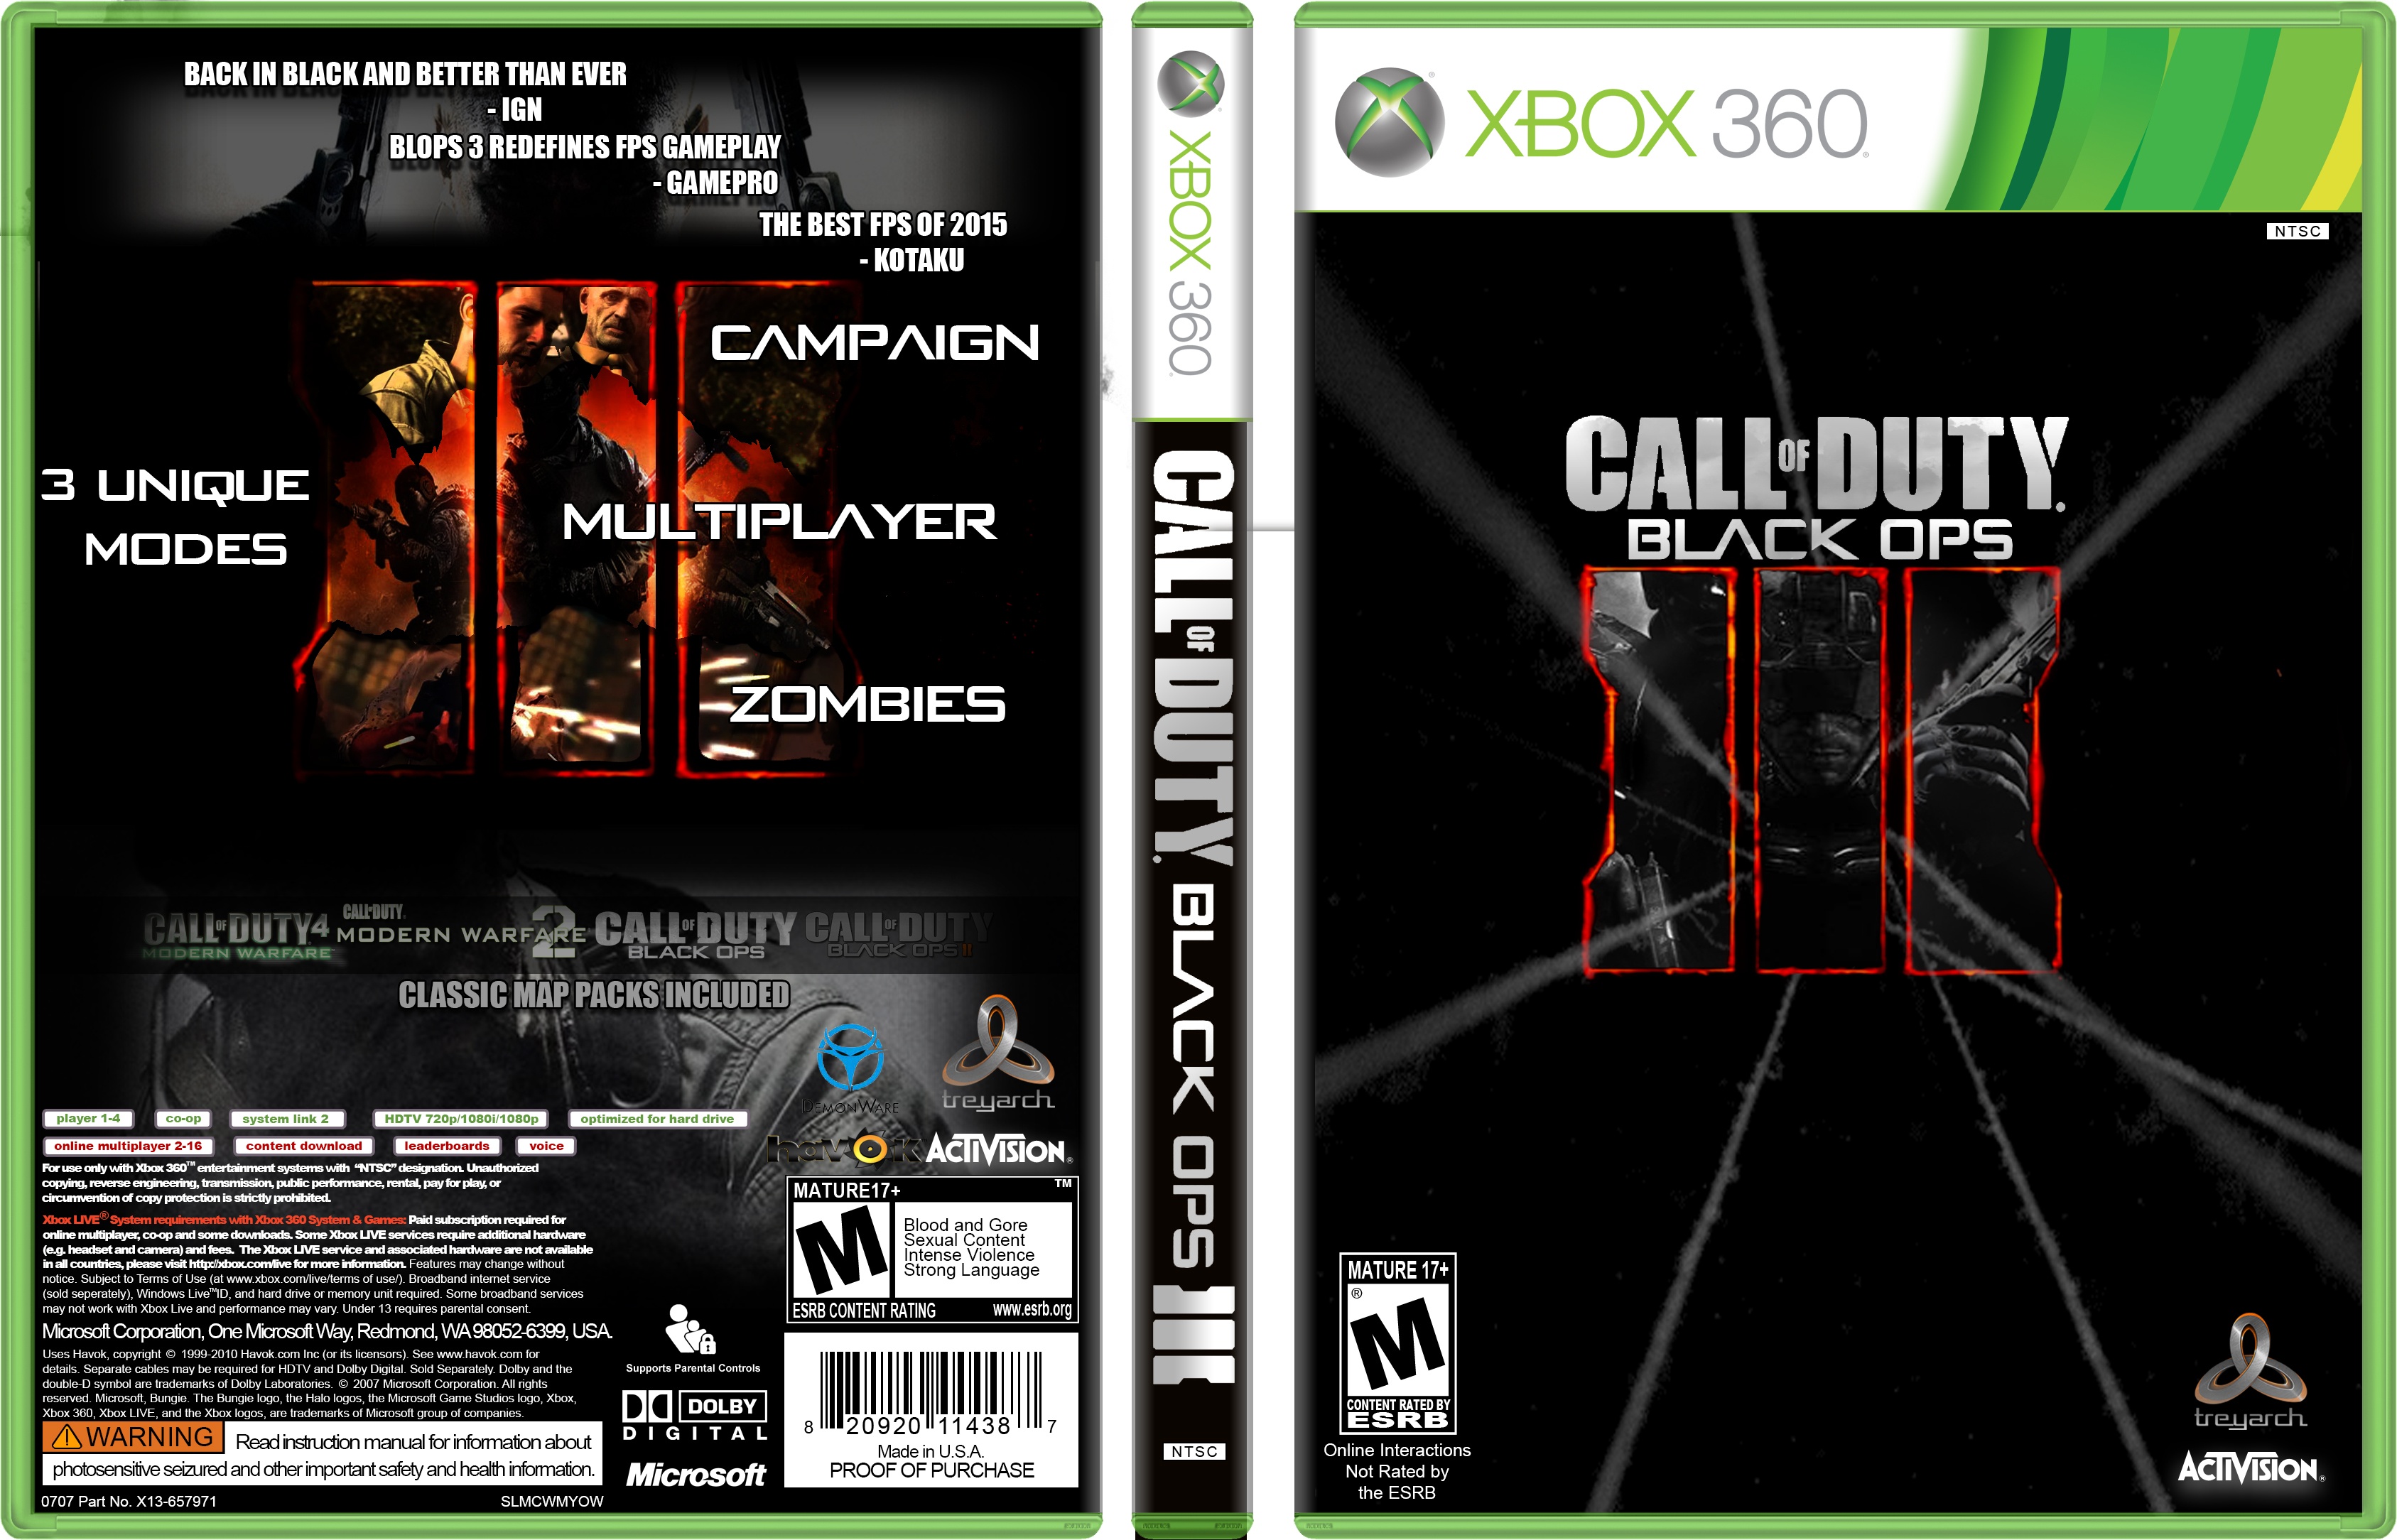 Call Of Duty - Black Ops 3 box cover